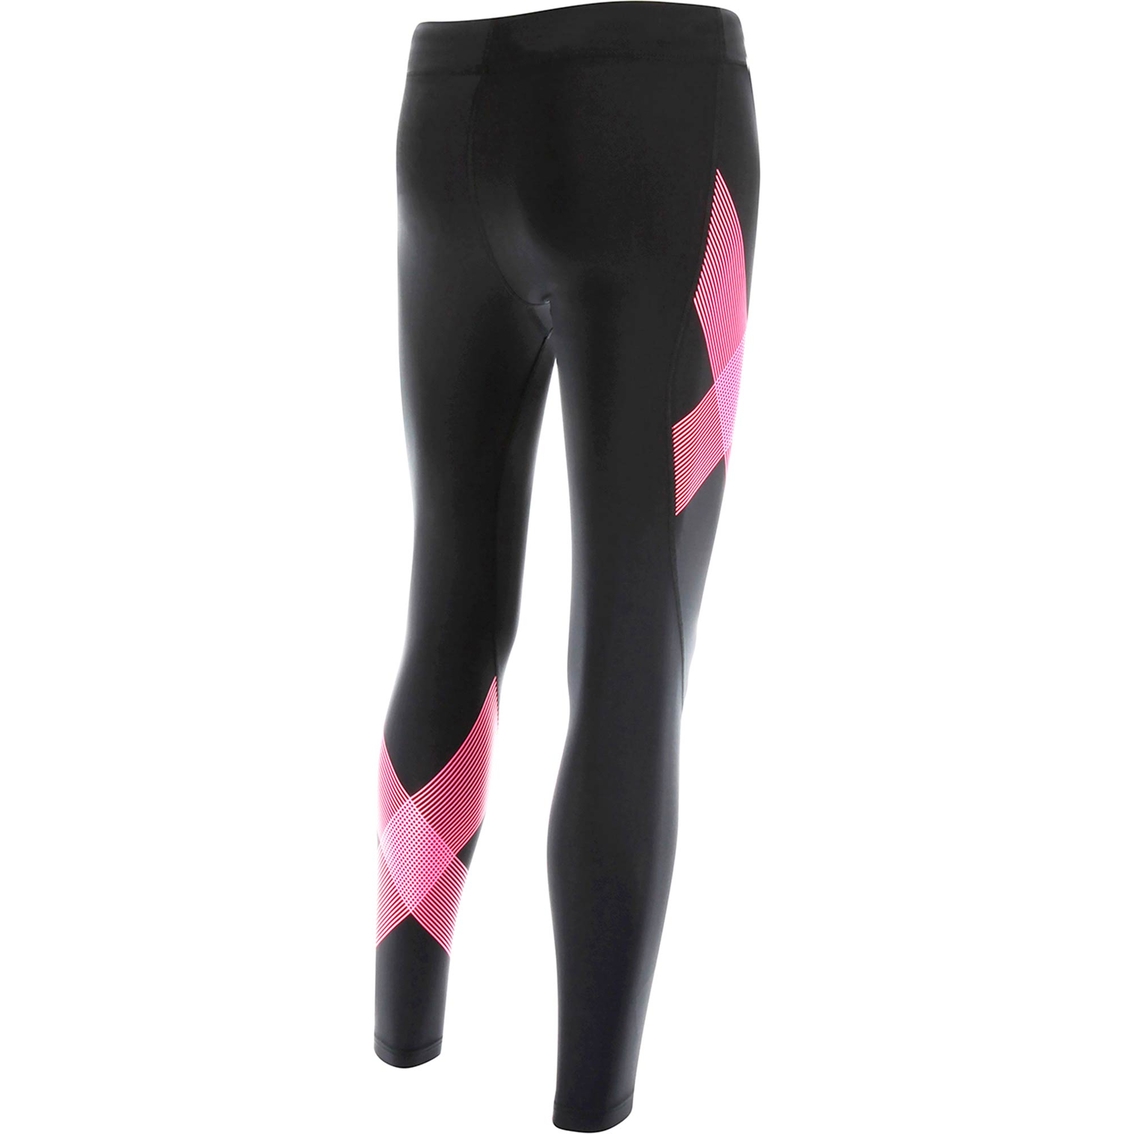 2XU Women's MidRise Compression Tights - Image 2 of 2